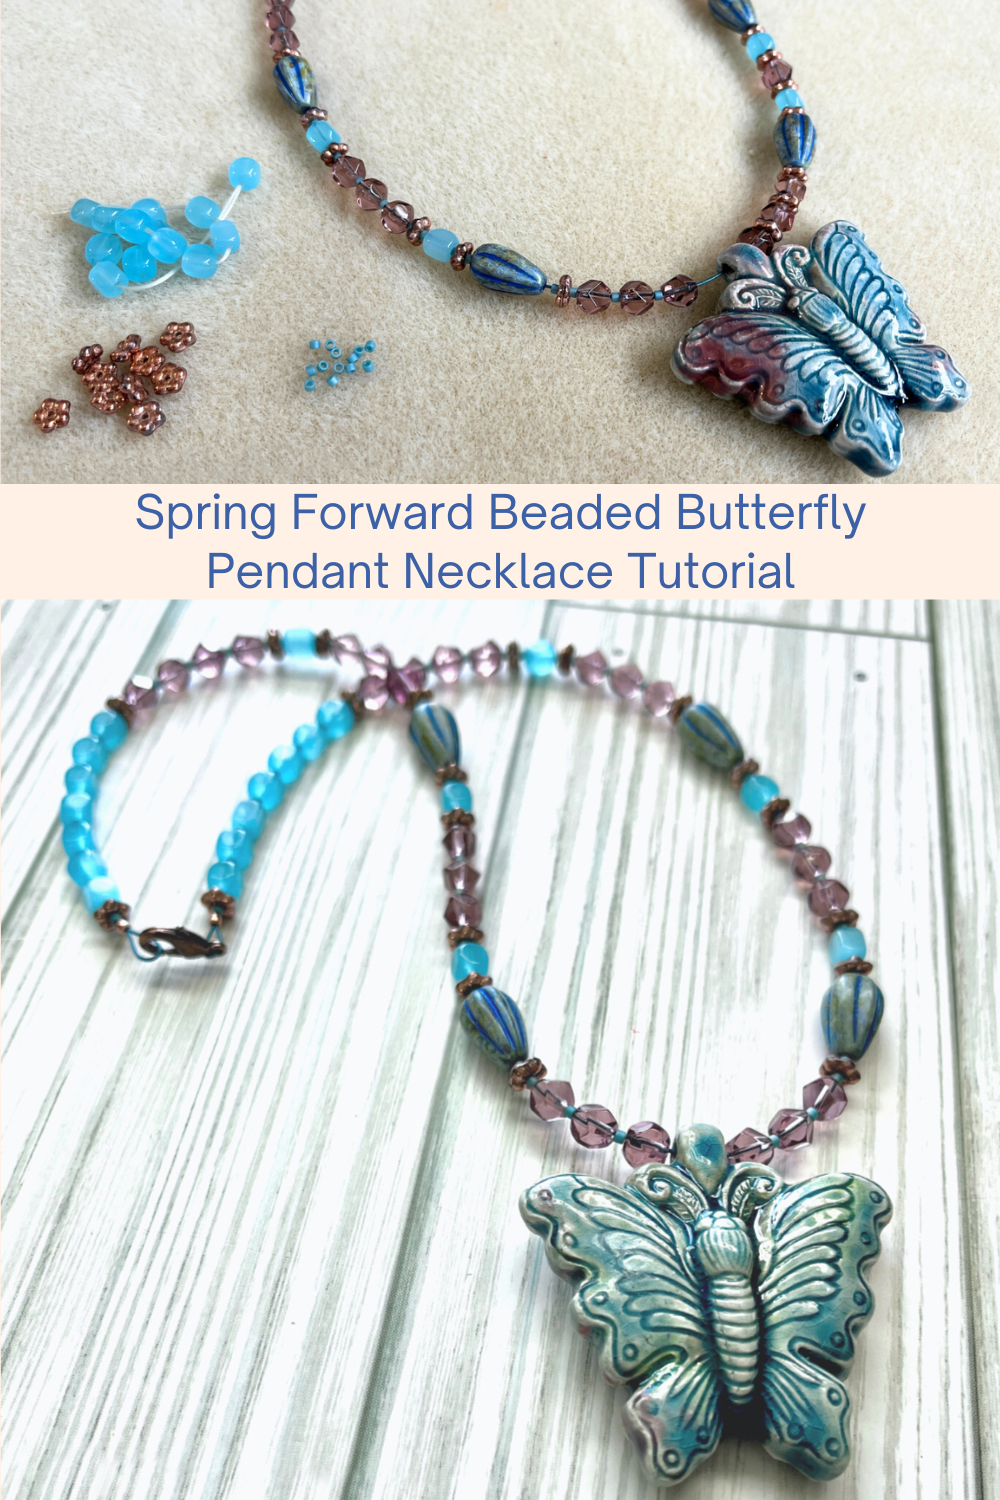 Spring Forward Beaded Butterfly Pendant Necklace Tutorial Collage